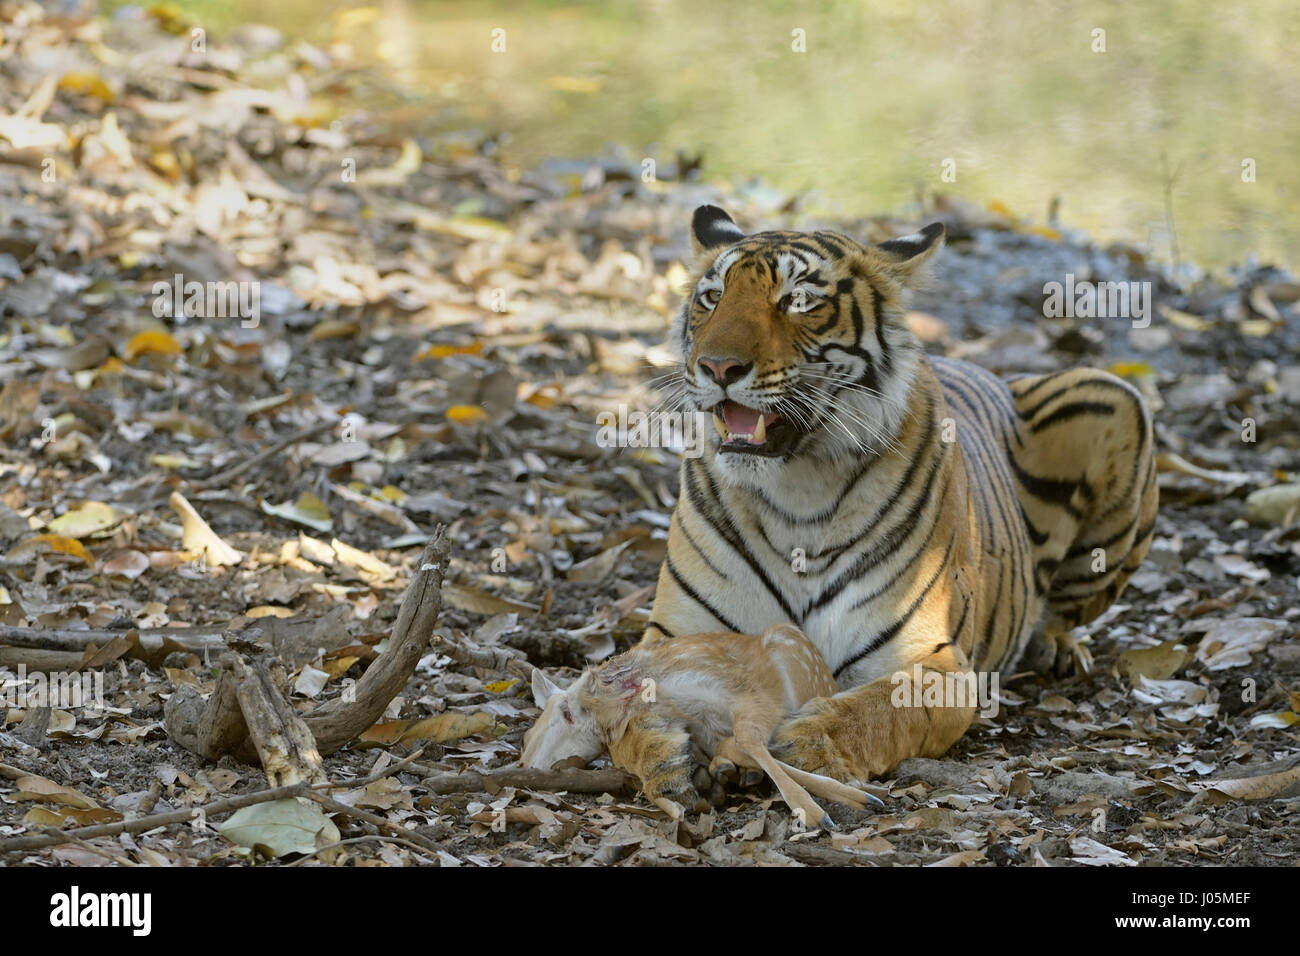 Close up of a wild Bengal tiger, eating a dead Spotted or Axis deer calf in Ranthambhore tiger reserve, India Stock Photo